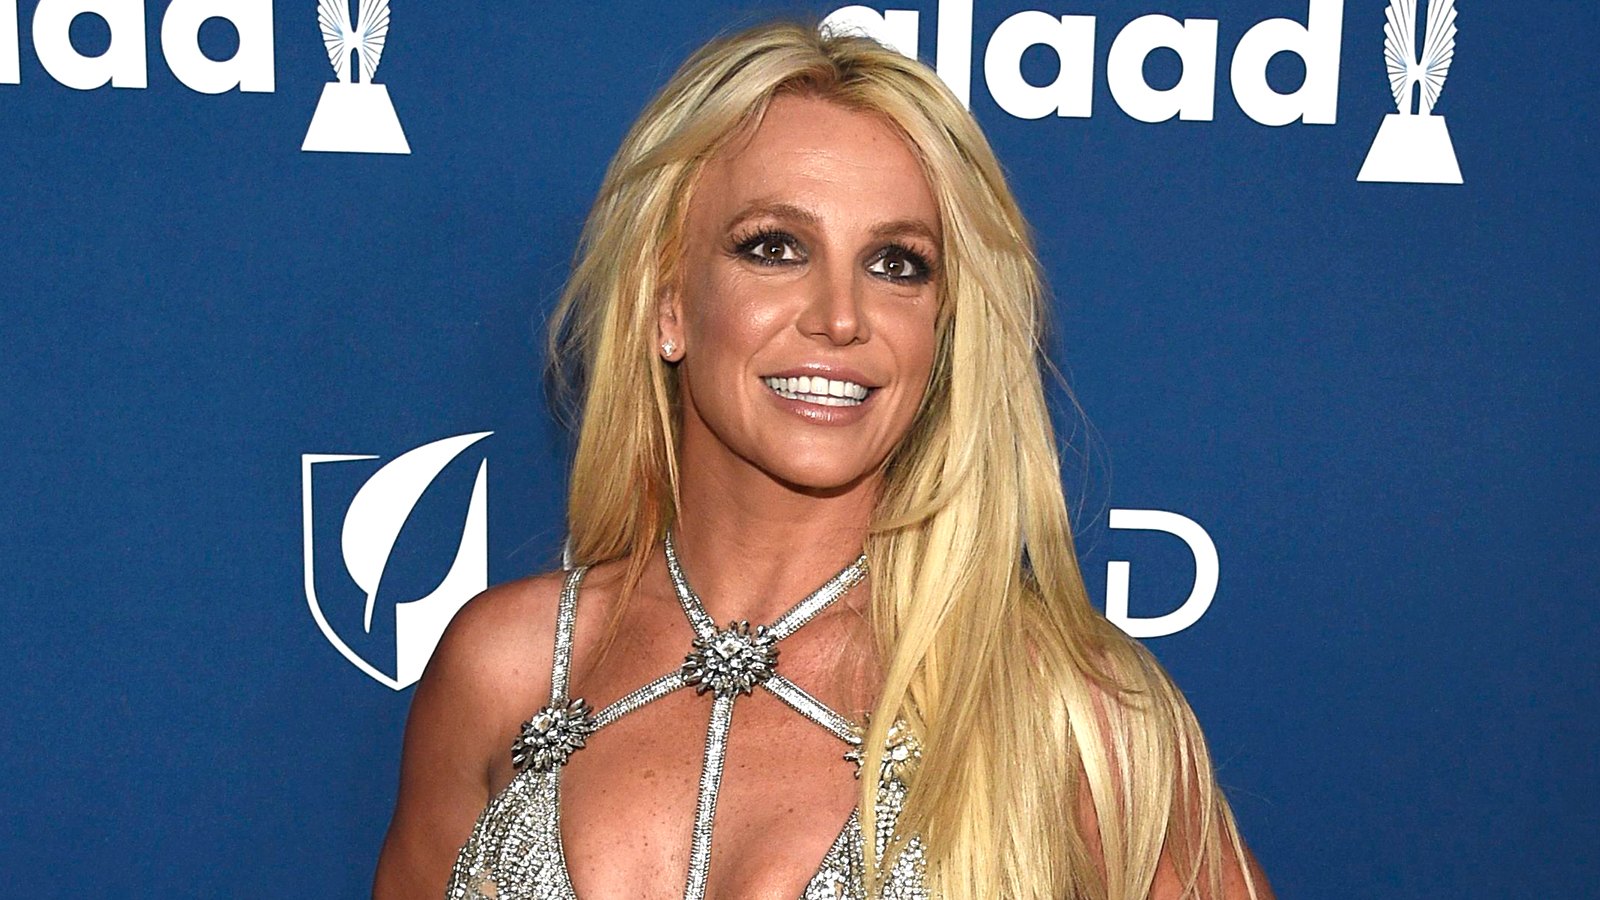 Britney Spears Explains the ‘Important’ Meaning Behind Her Nude Instagram Photos